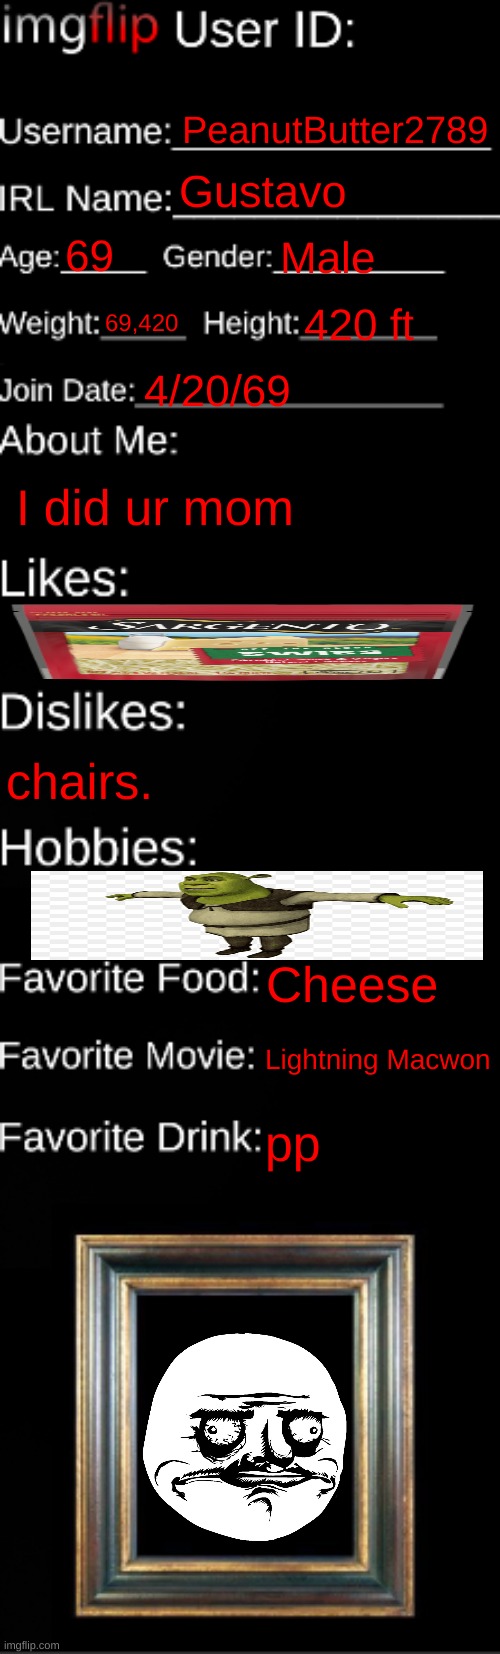 This is me | PeanutButter2789; Gustavo; 69; Male; 69,420; 420 ft; 4/20/69; I did ur mom; chairs. Cheese; Lightning Macwon; pp | image tagged in imgflip id card | made w/ Imgflip meme maker